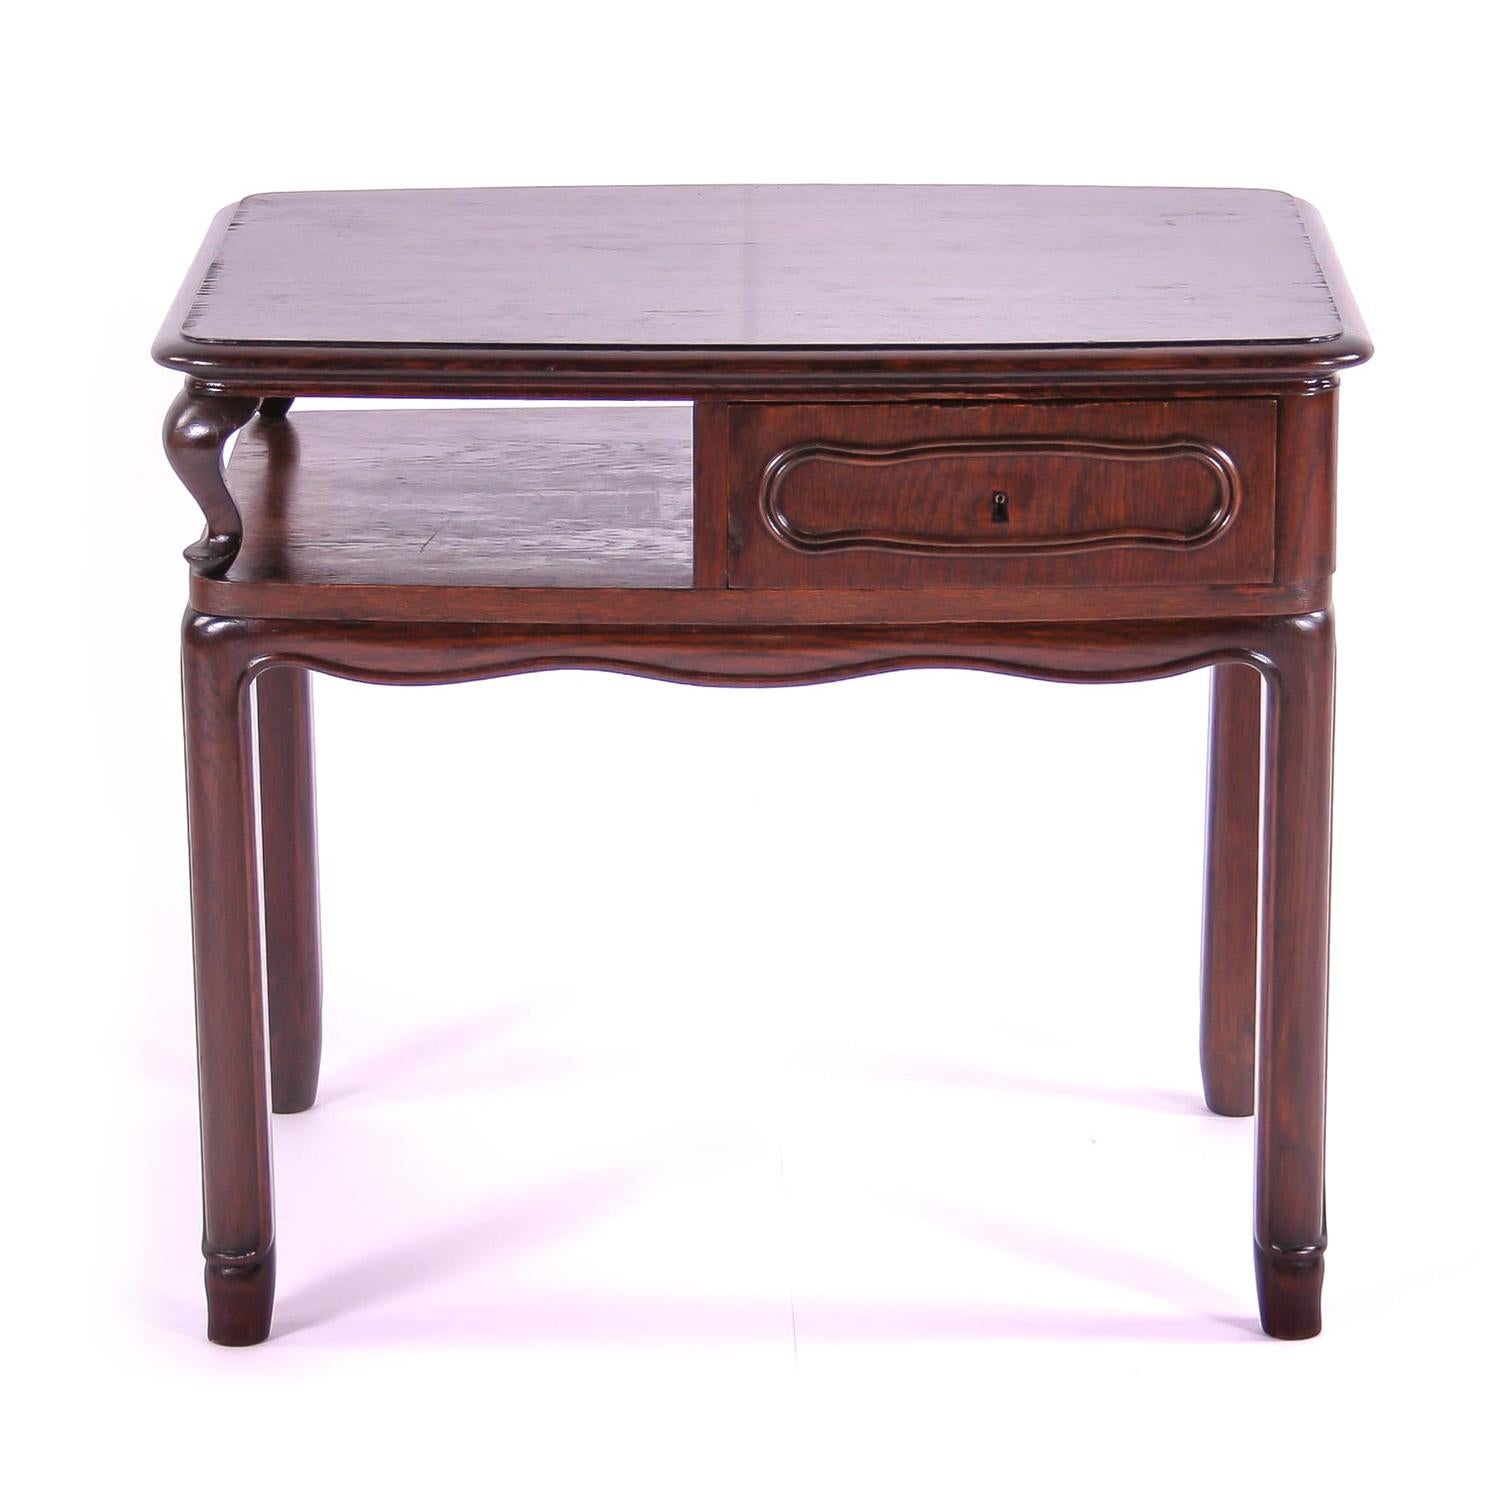 Other Czech Historism Design Table with Storage and Drawer For Sale